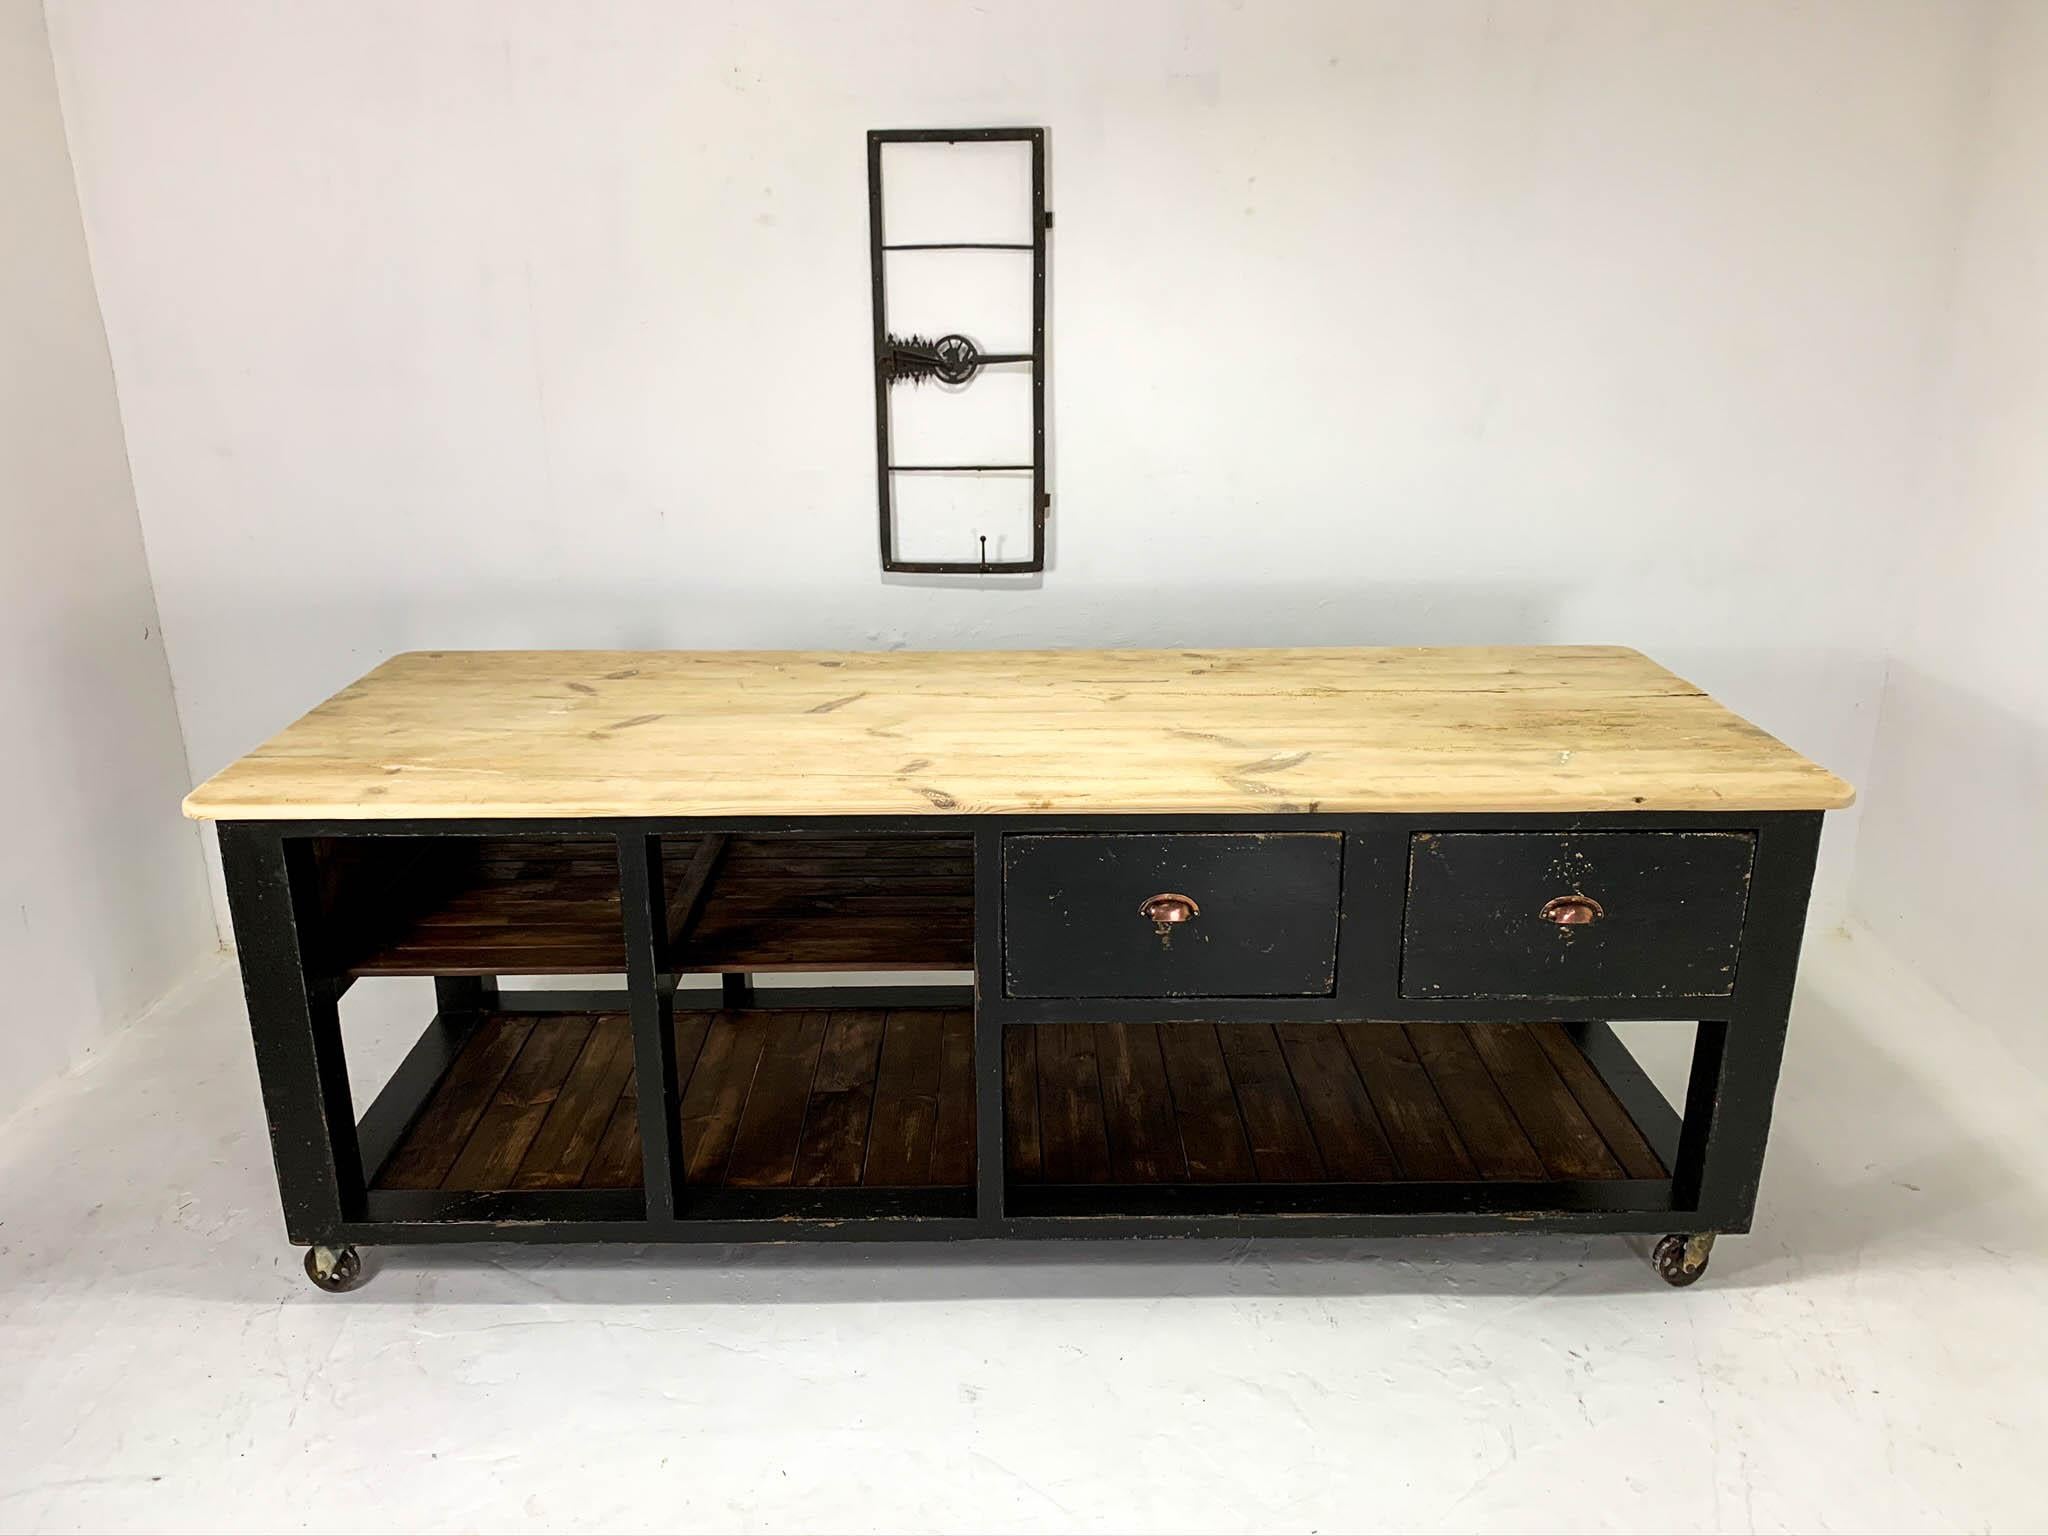 Vintage Industrial English Country House WorkTable Workbench Pine Kitchen Island 7